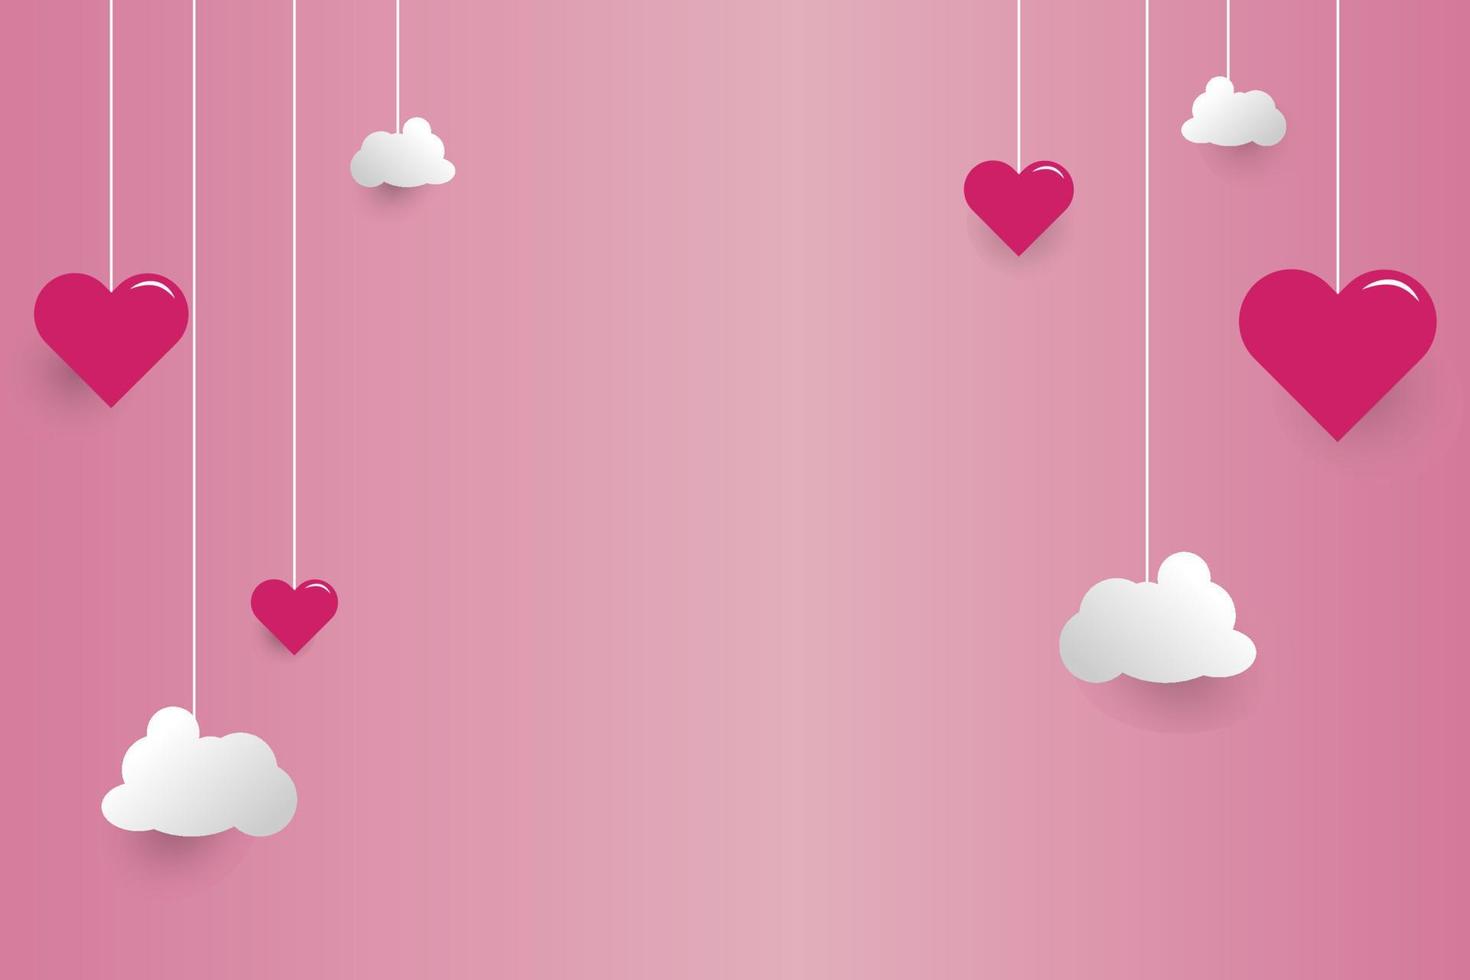 pink hearts background pink background with heart for Vector symbols of love for Happy Women's, Mother's, Valentine's Day, birthday greeting card design.